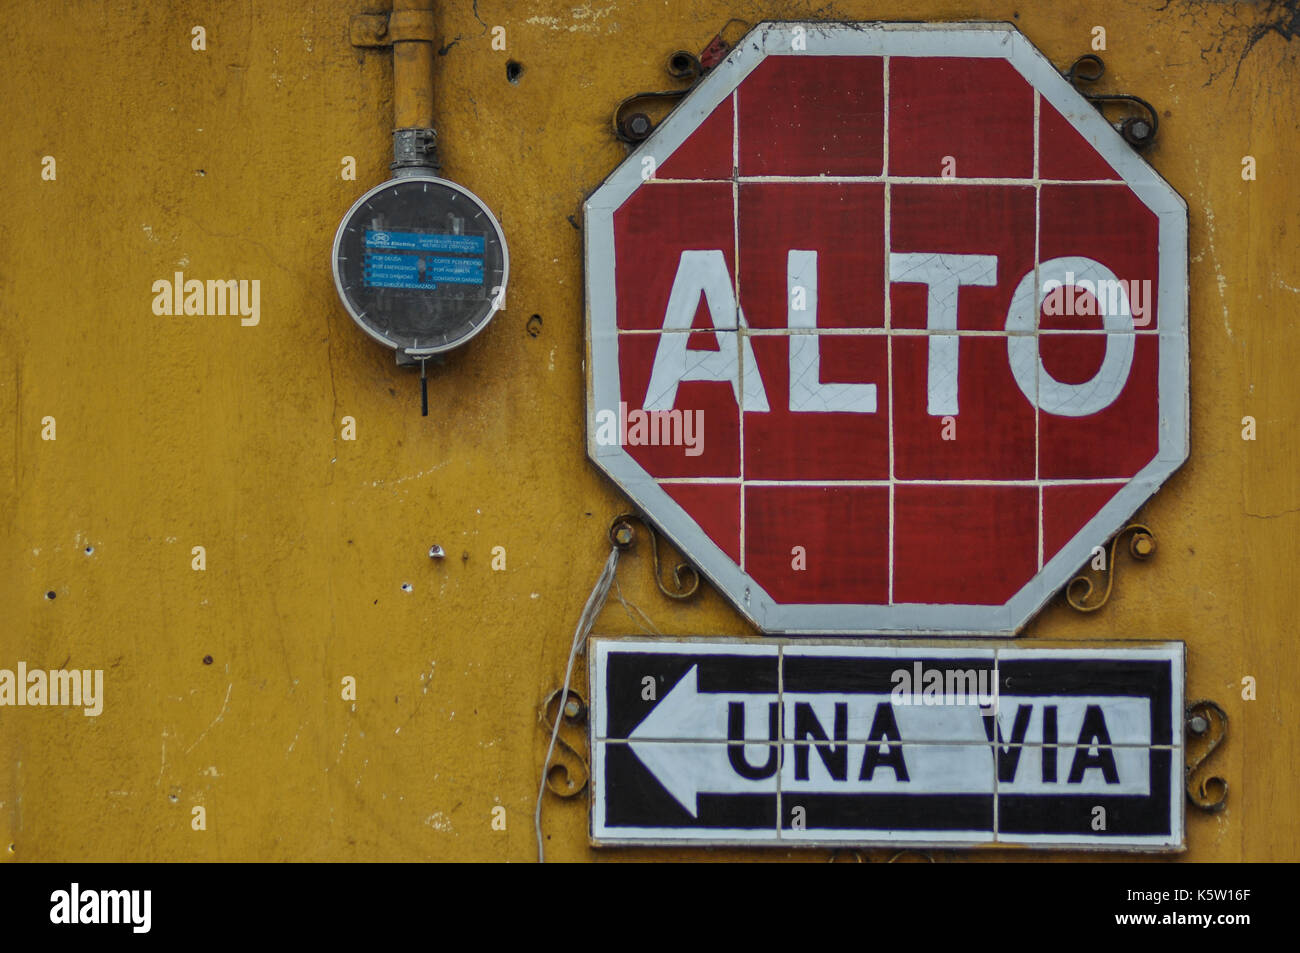 A red and white stop sign reading 'alto' is mounted on a yellow wall above a black and white sign indicating 'una via,' which translates to 'one way' Stock Photo